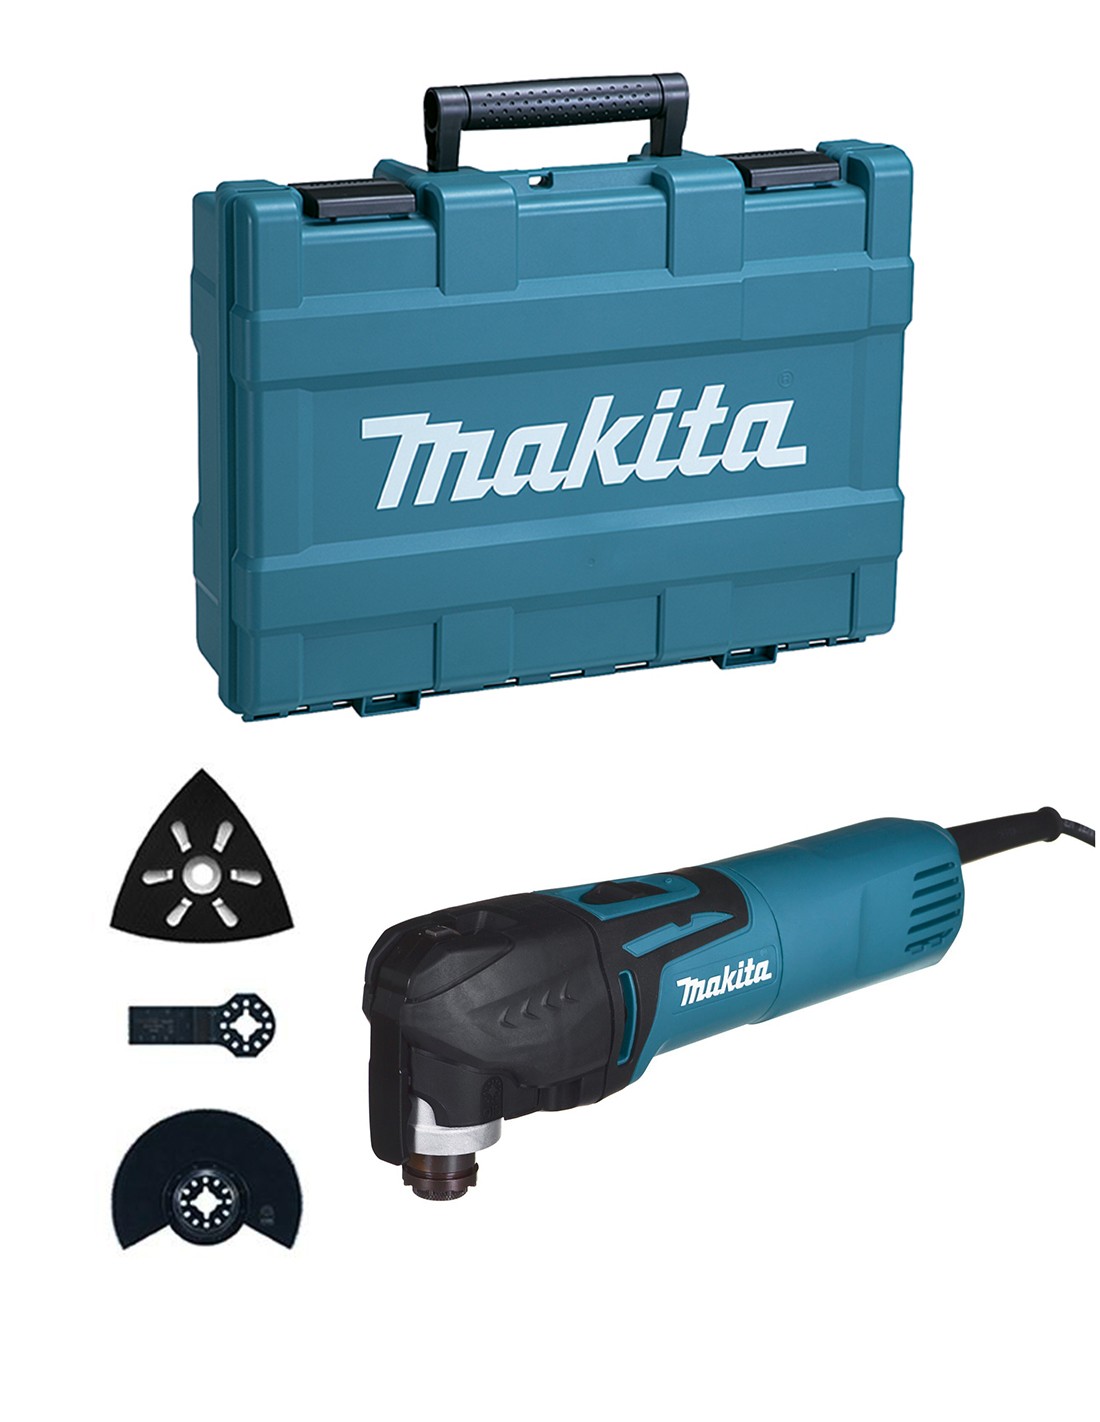 Outil multifonction makita - Cdiscount